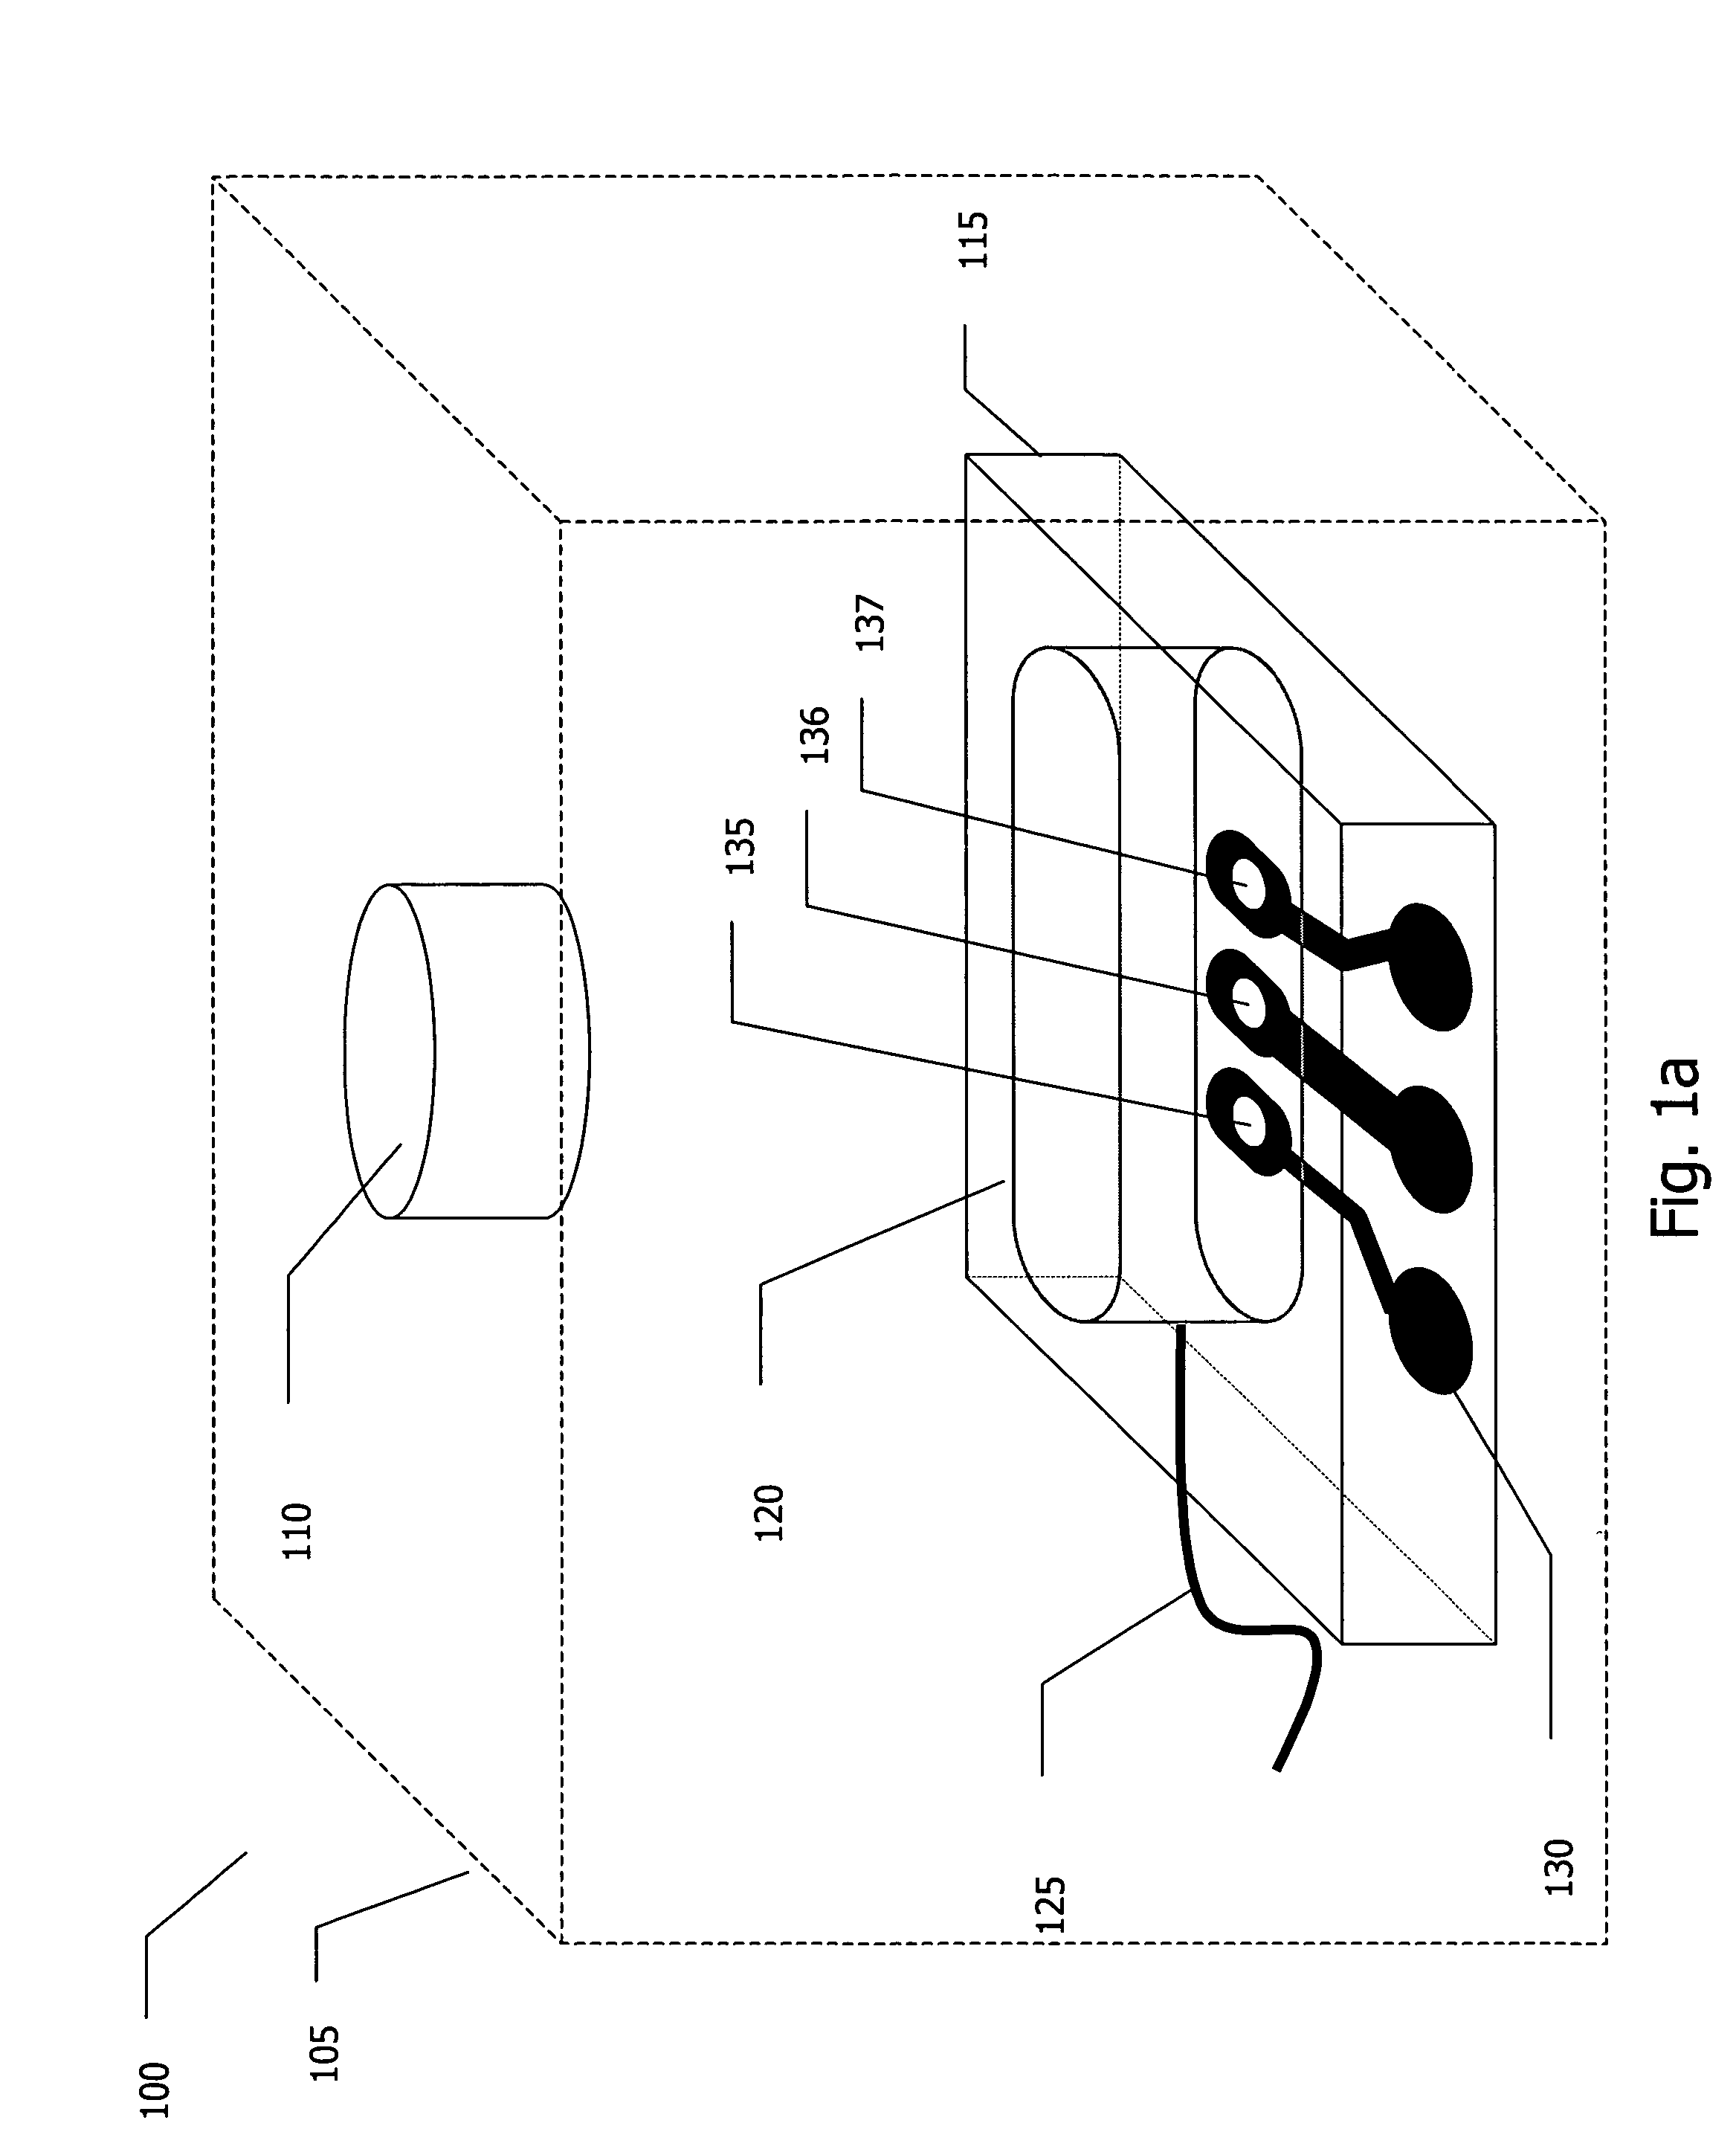 Assay cartridges and methods of using the same